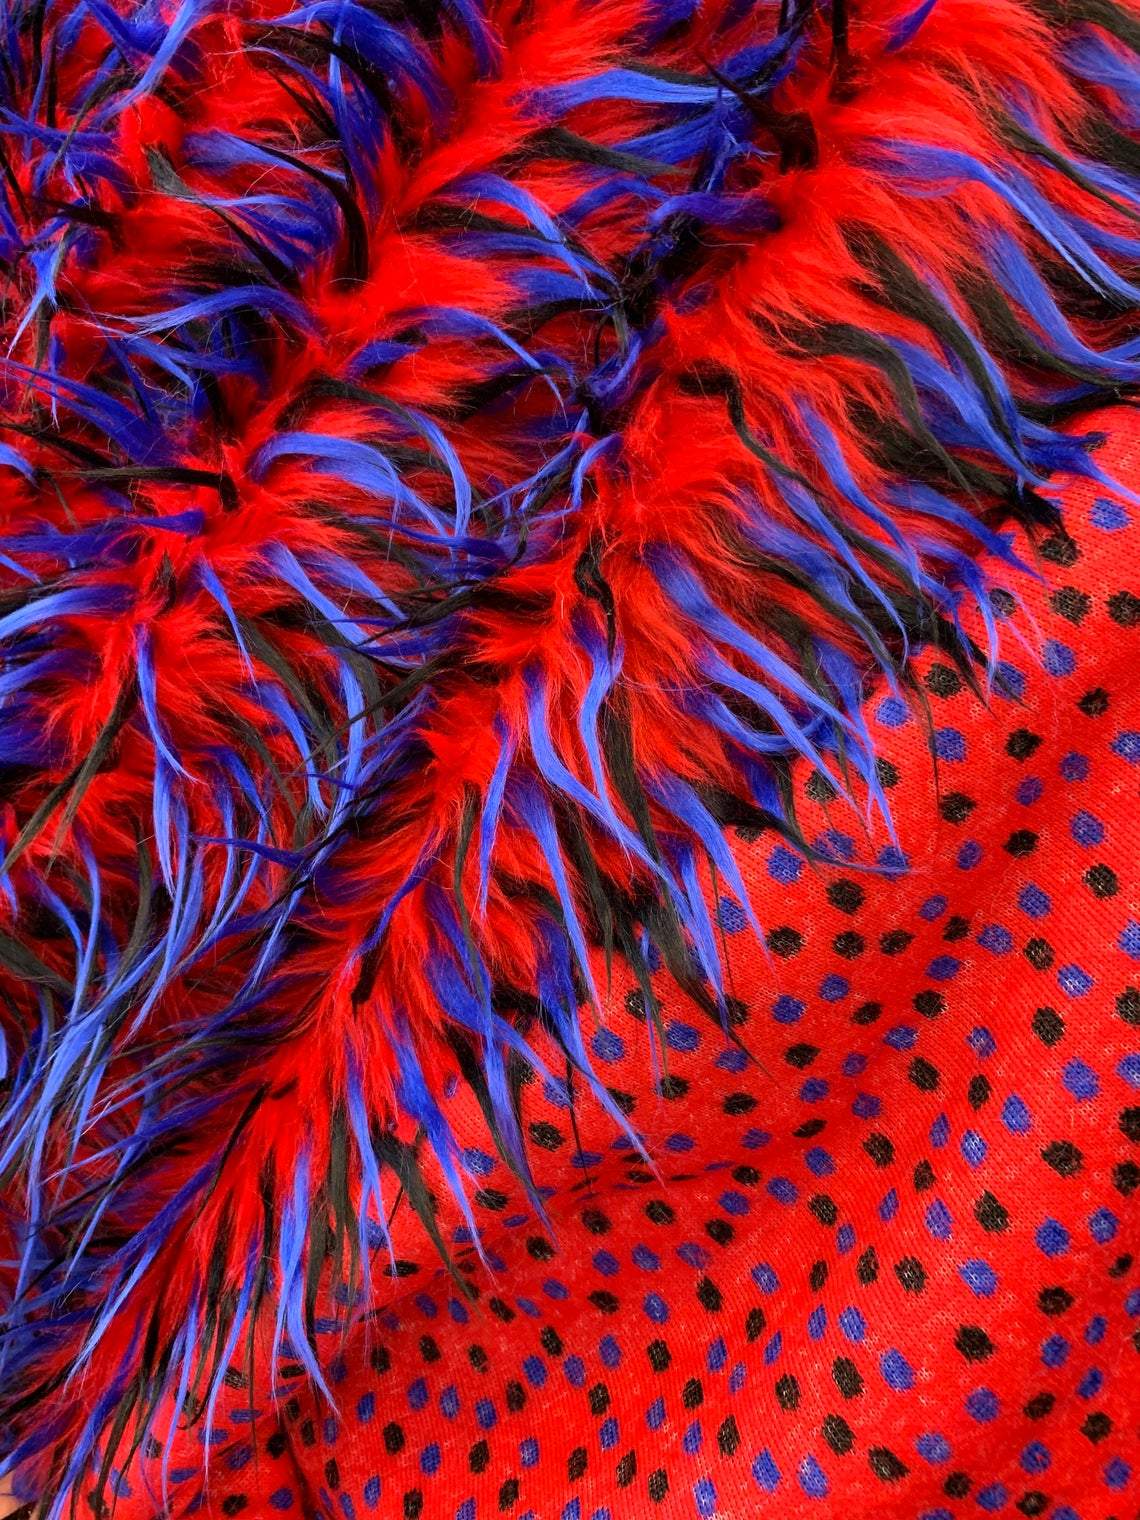 Red, Blue and Black Faux Fur Fabric By The Yard 3 Tone Fashion Fabric MaterialICE FABRICSICE FABRICSRed, Blue and Black Faux Fur Fabric By The Yard 3 Tone Fashion Fabric Material ICE FABRICS